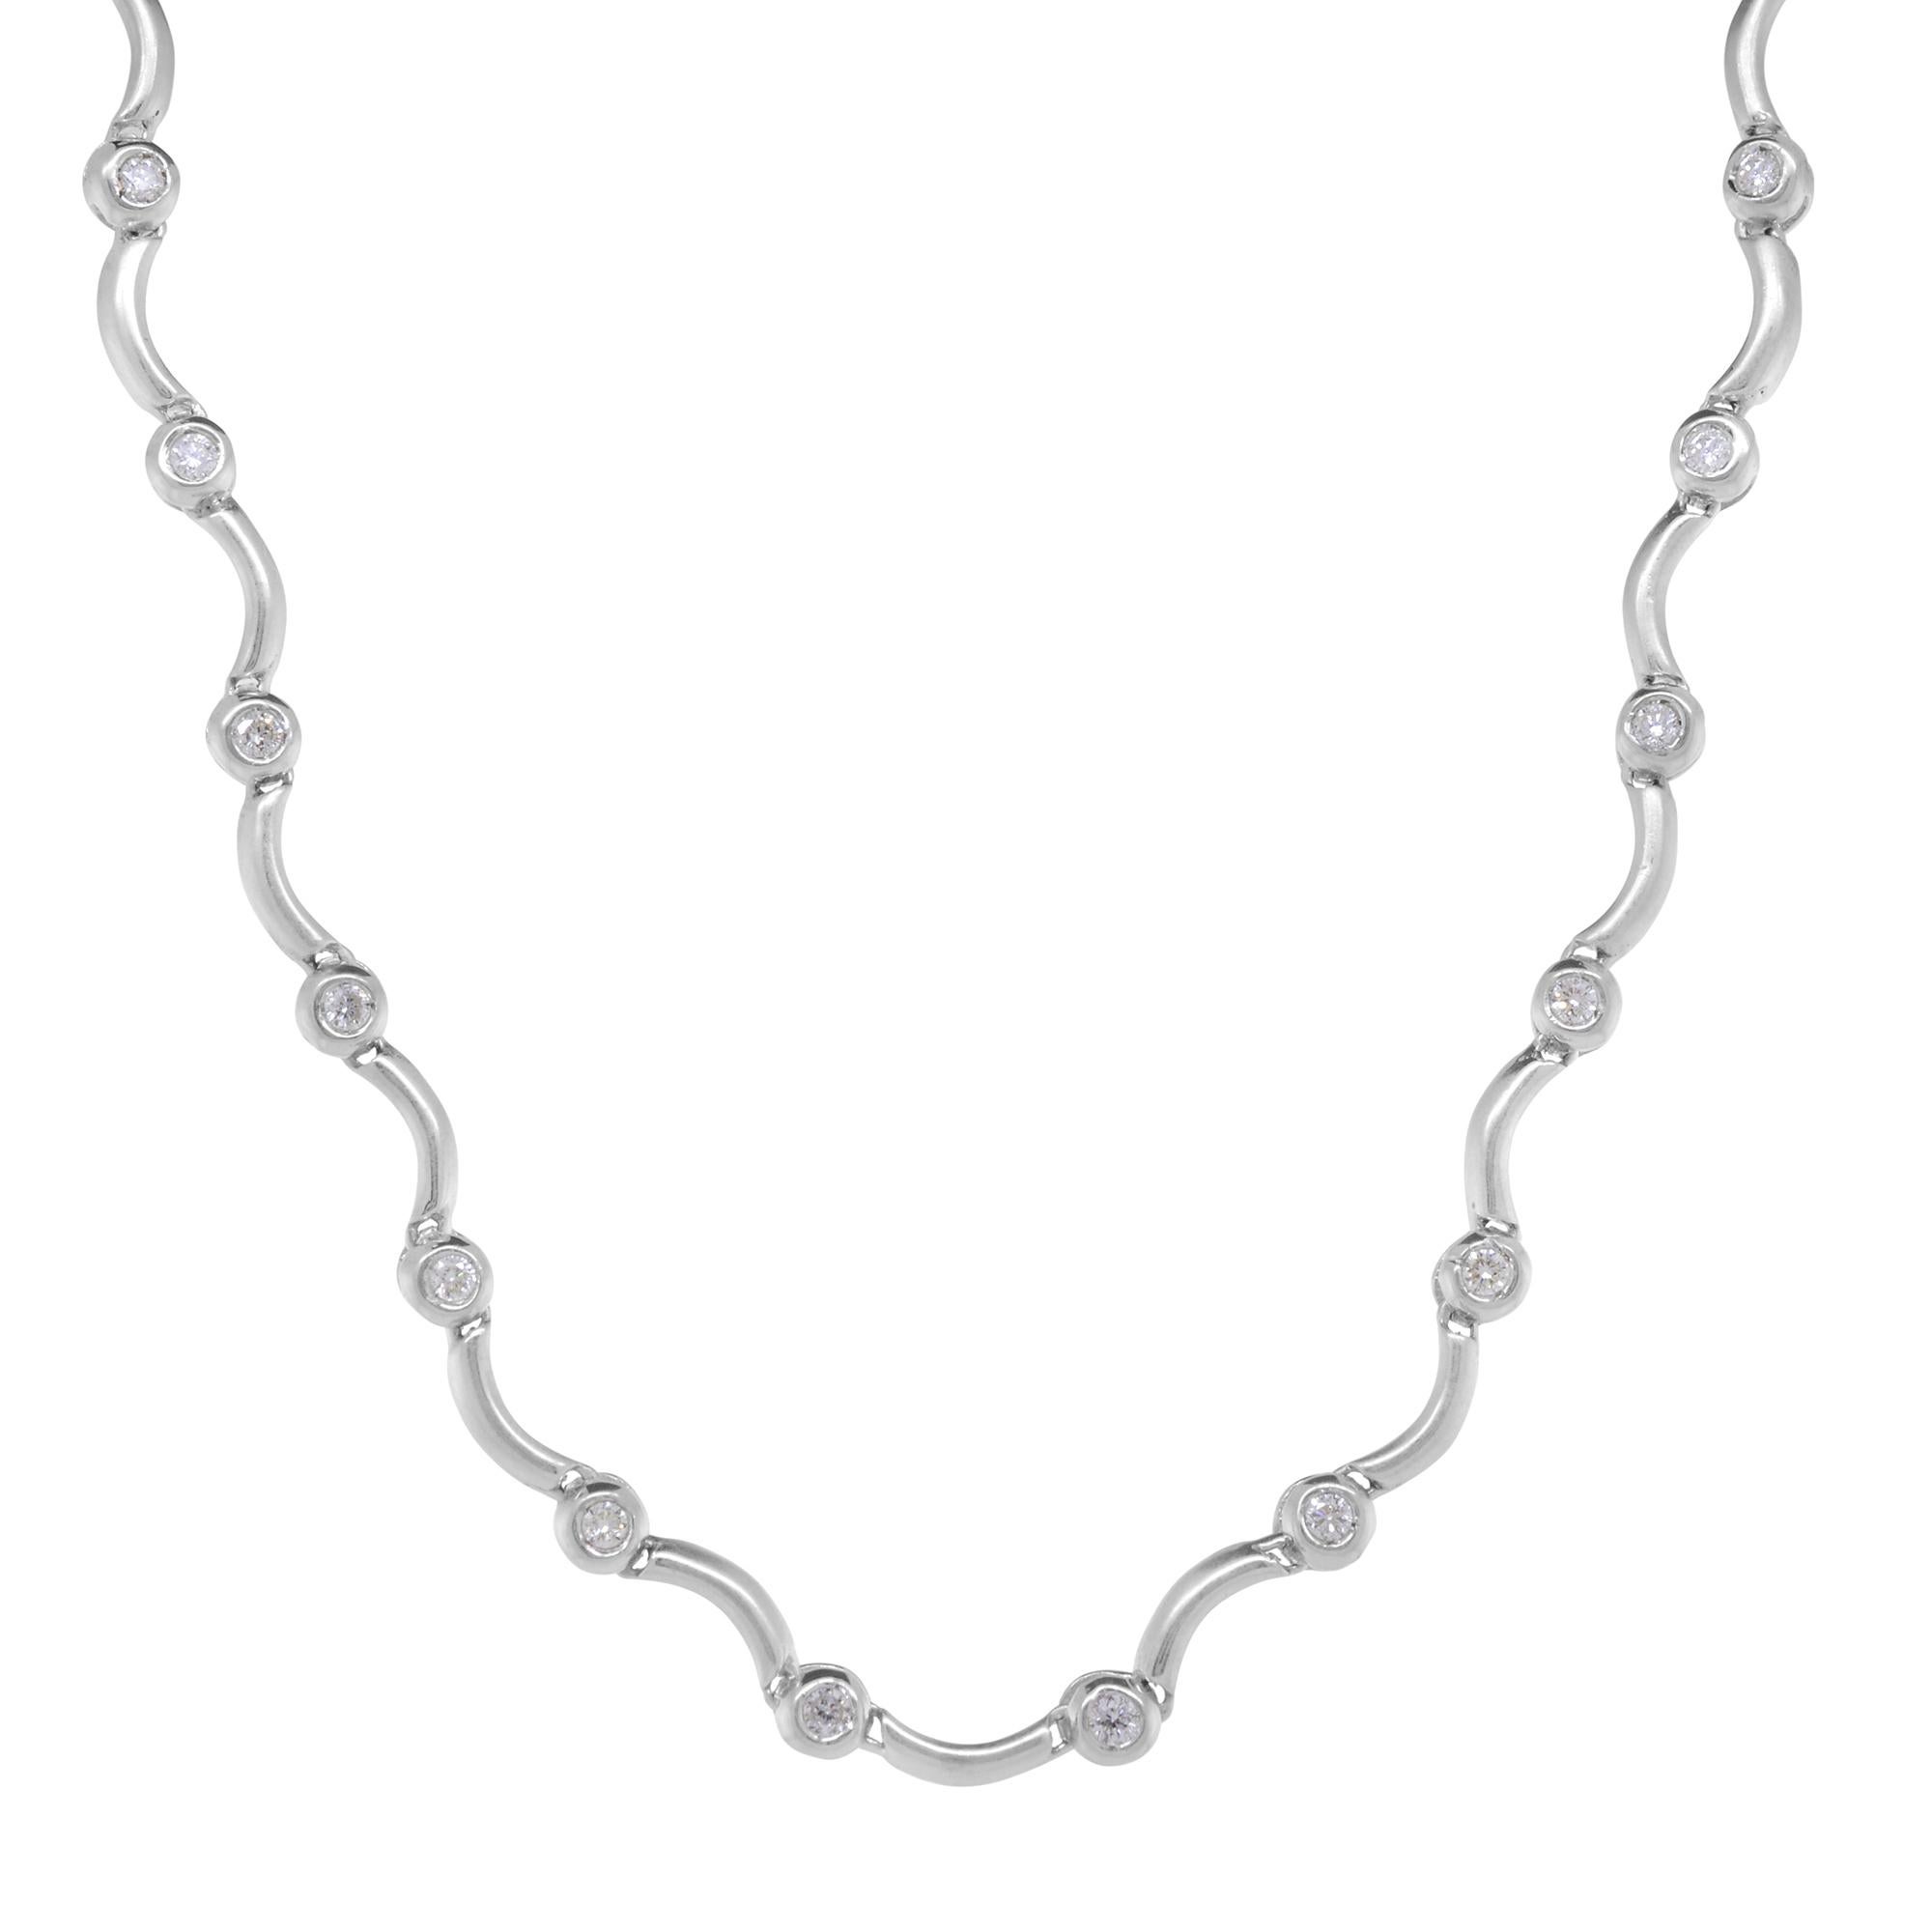 An excellent pick for weddings or any special events or everyday wear. This diamond necklace is crafted in 18K white gold, featuring round brilliant cut sparkling diamonds weighing 0.95cttw with G-H color and VS-SI clarity. Necklace length: 16